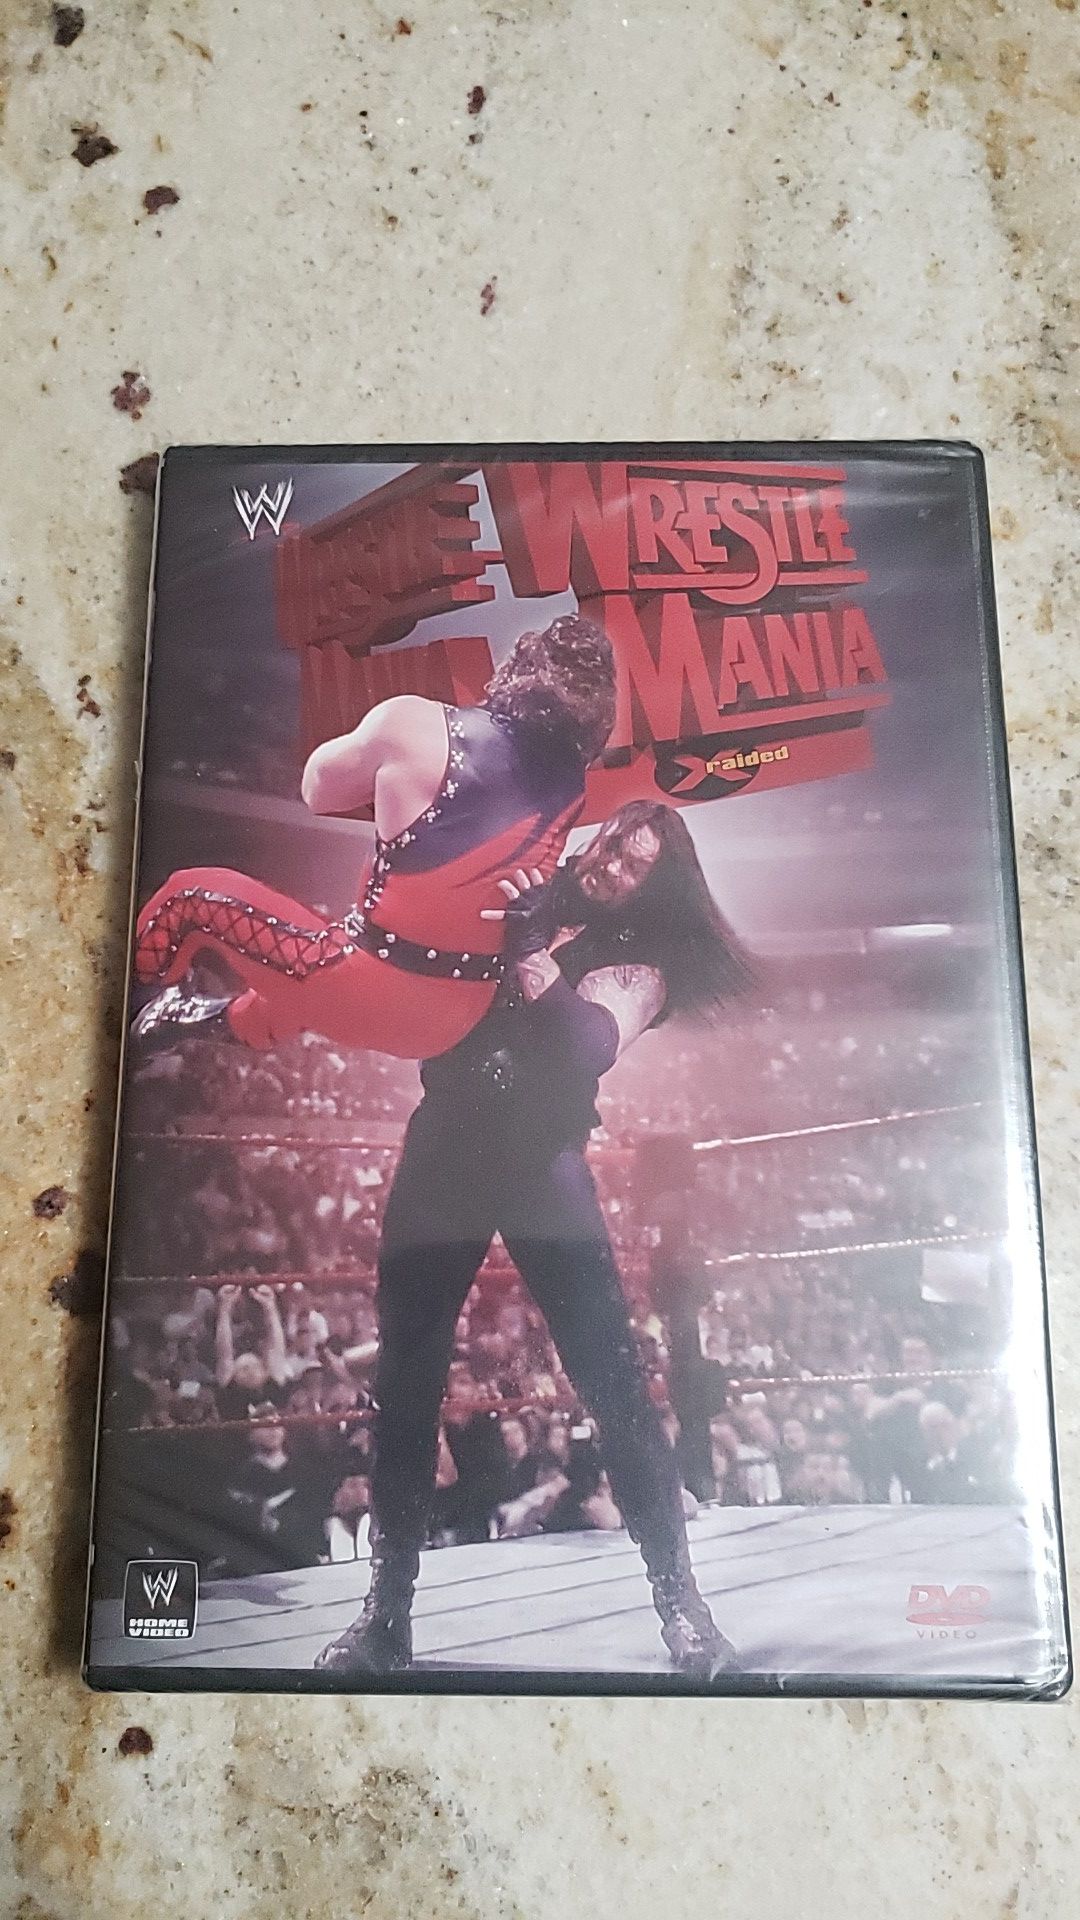 WWE - WWF - WrestleMania 14 (DVD, 2013)Authentic US Release Out of Print RARE Dvd is Brand New factory sealed.